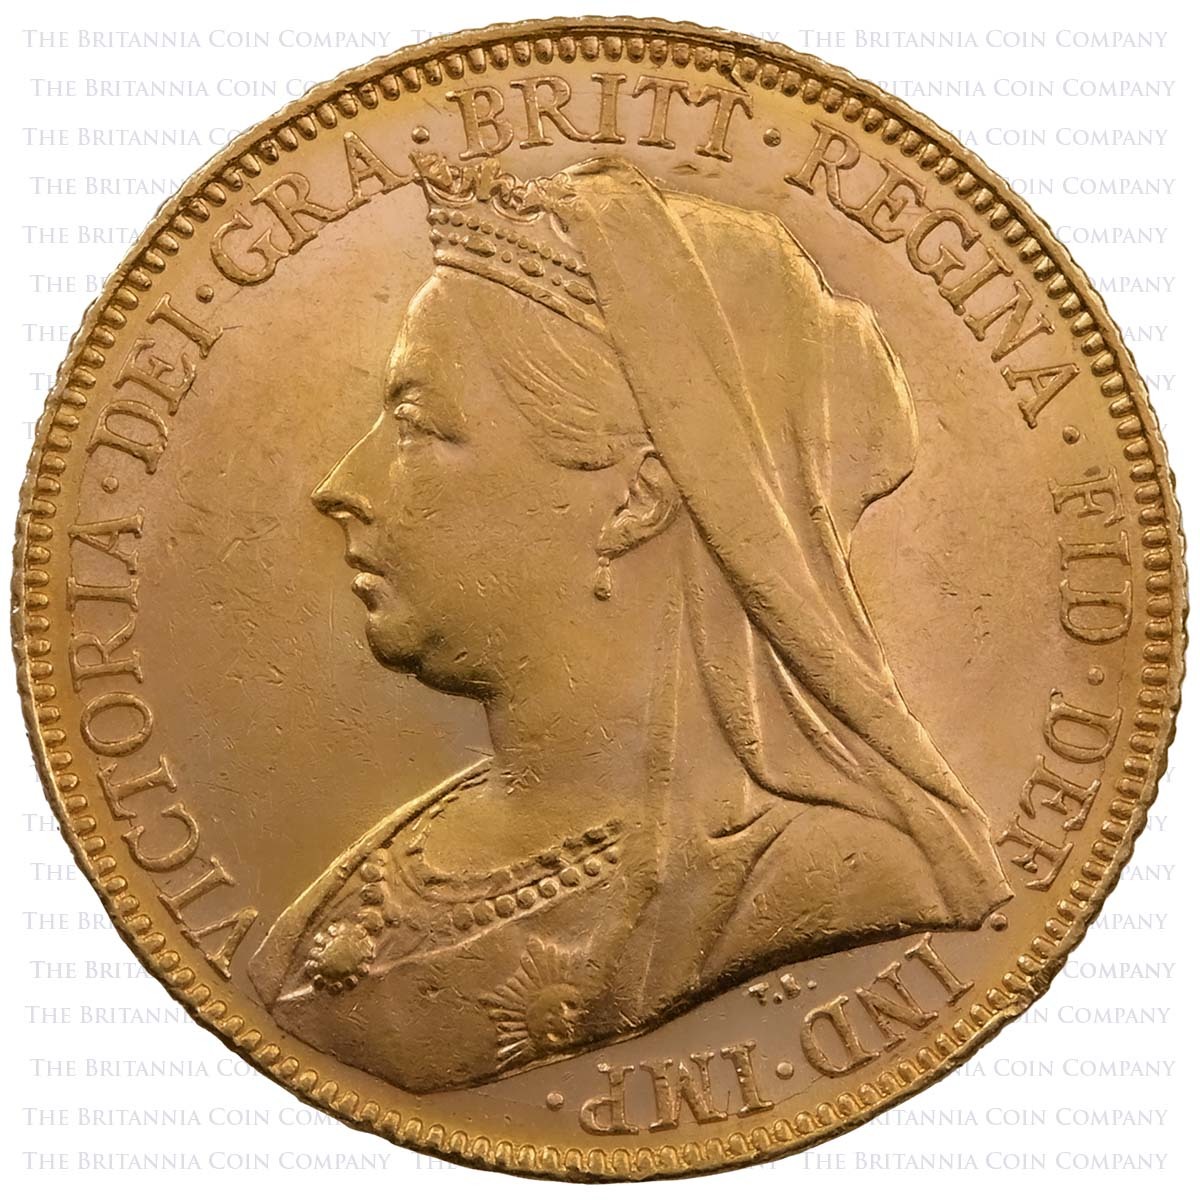 1900 Queen Victoria Gold Full Sovereign Melbourne Mint Widowed Veiled Old Head Coin Obverse